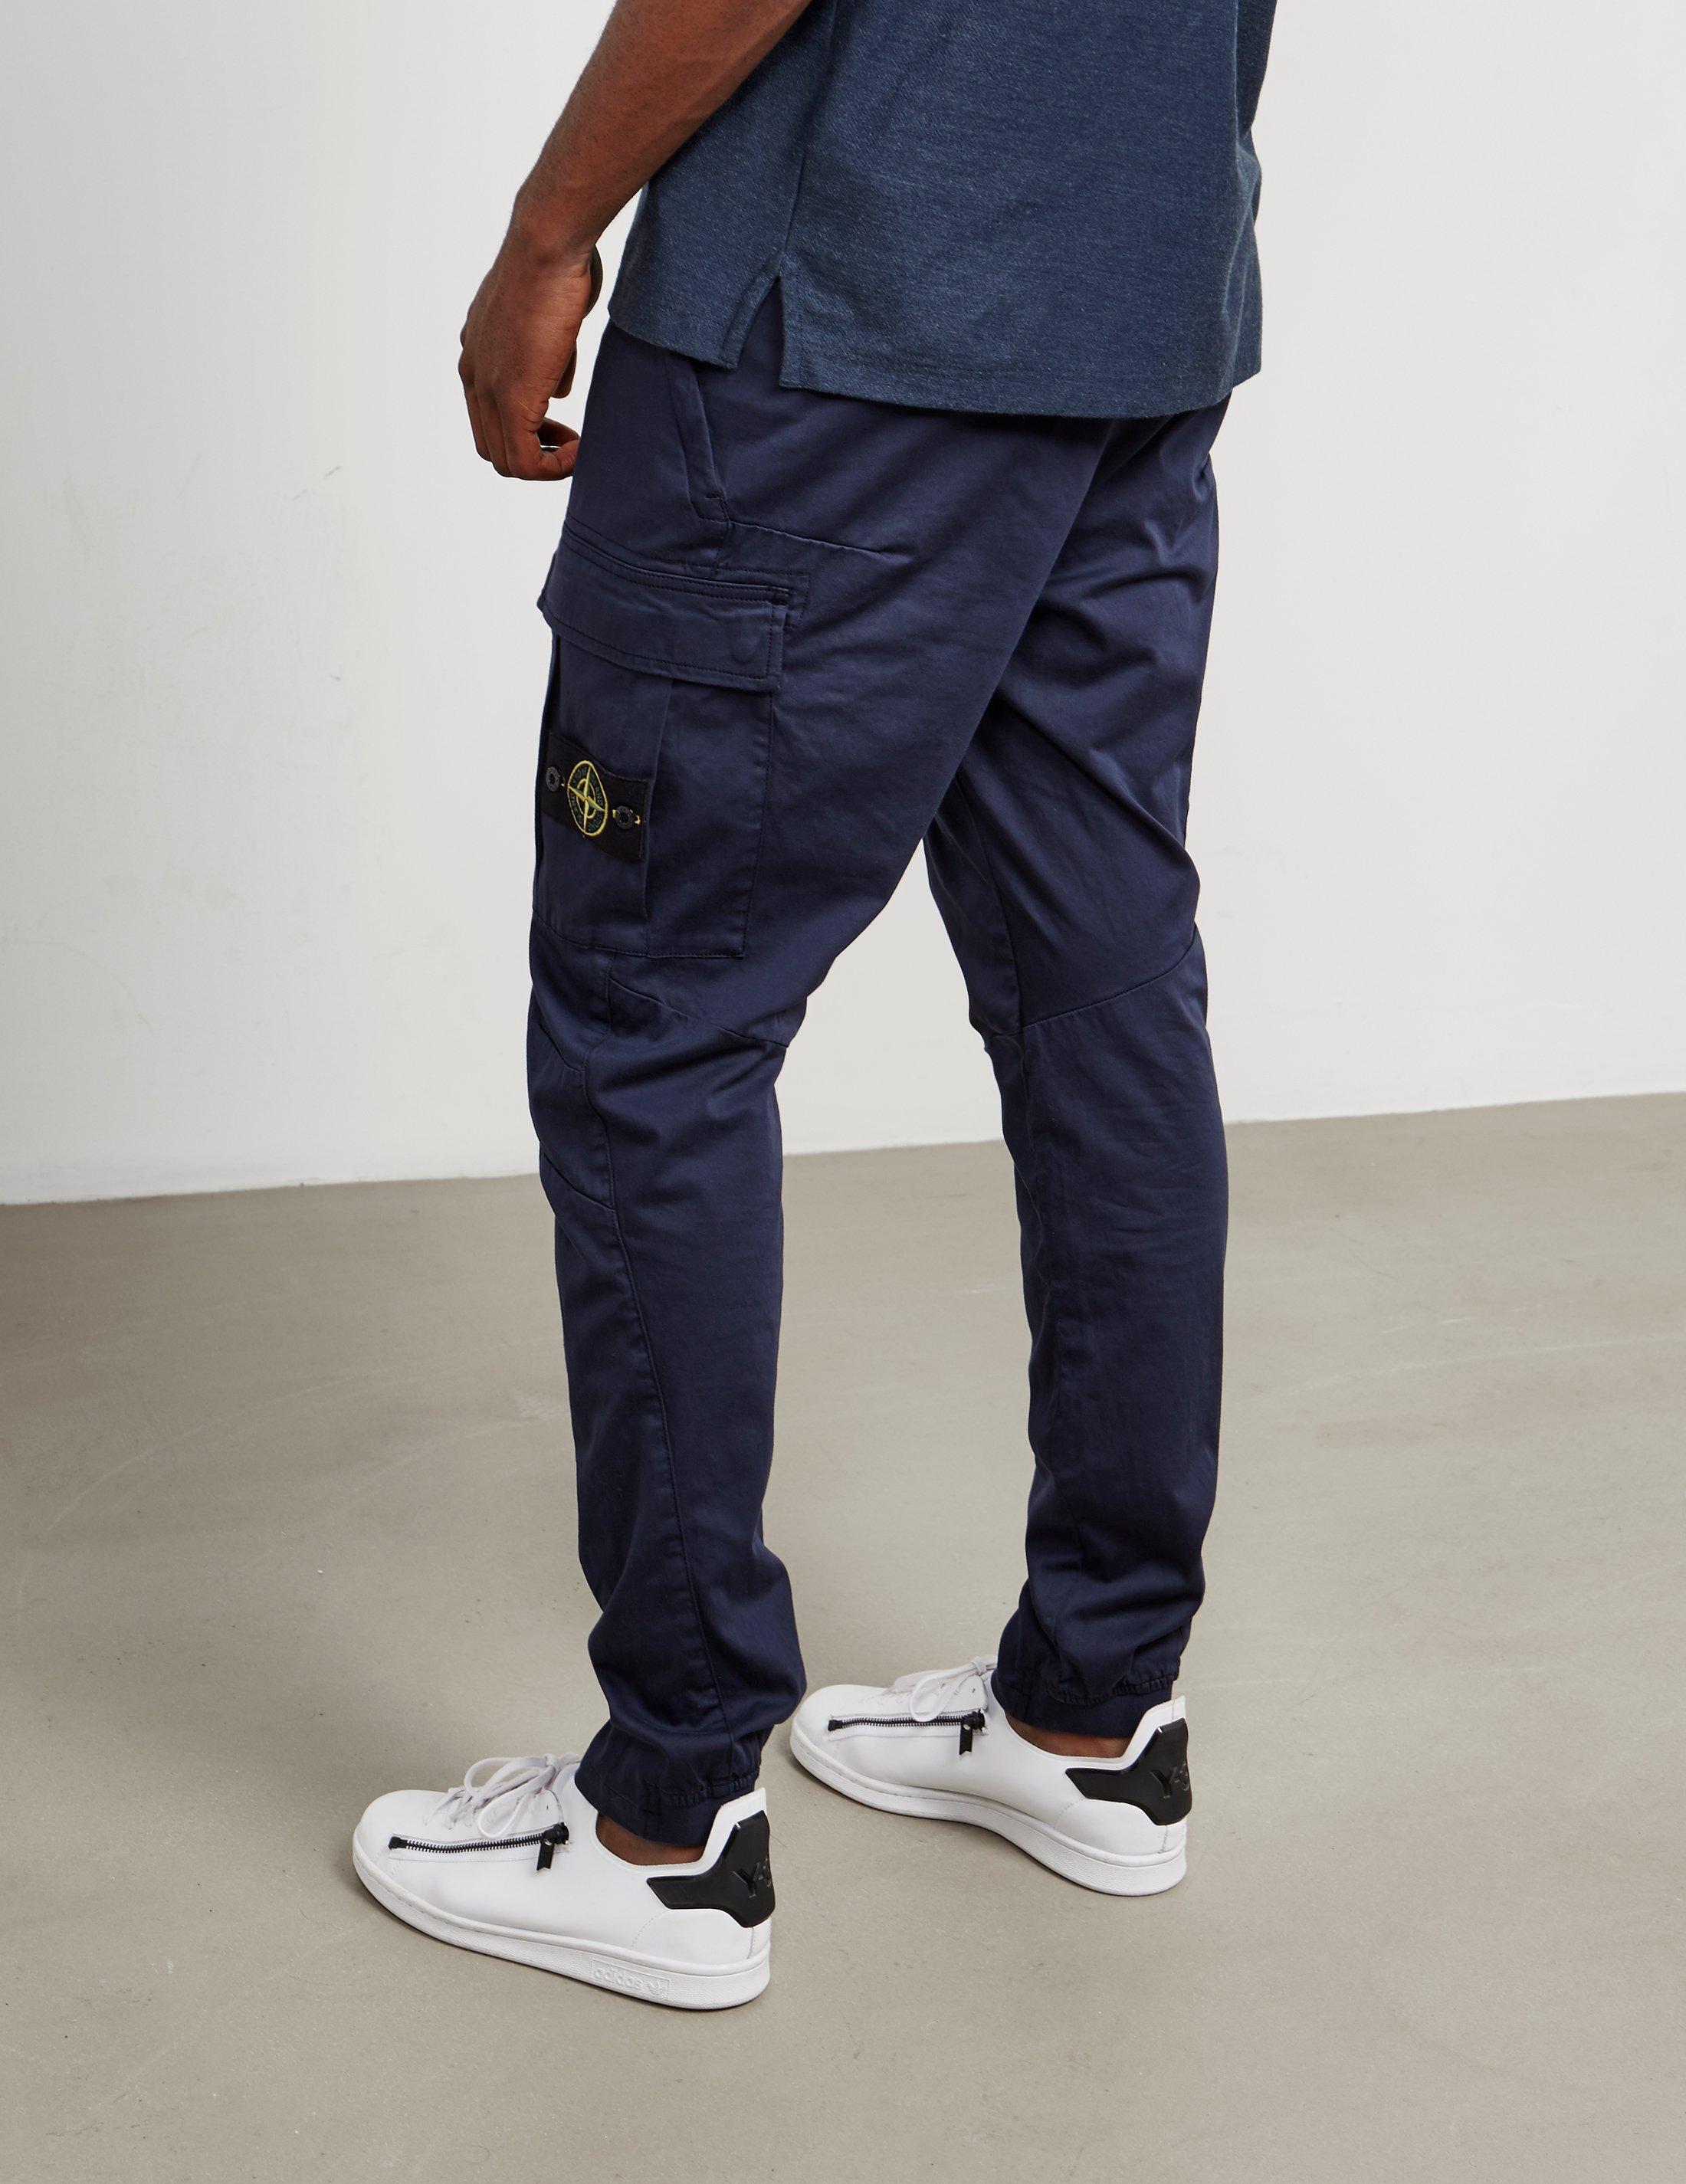 Navy Stone Island Joggers Clearance, SAVE 30% - pacificlanding.ca